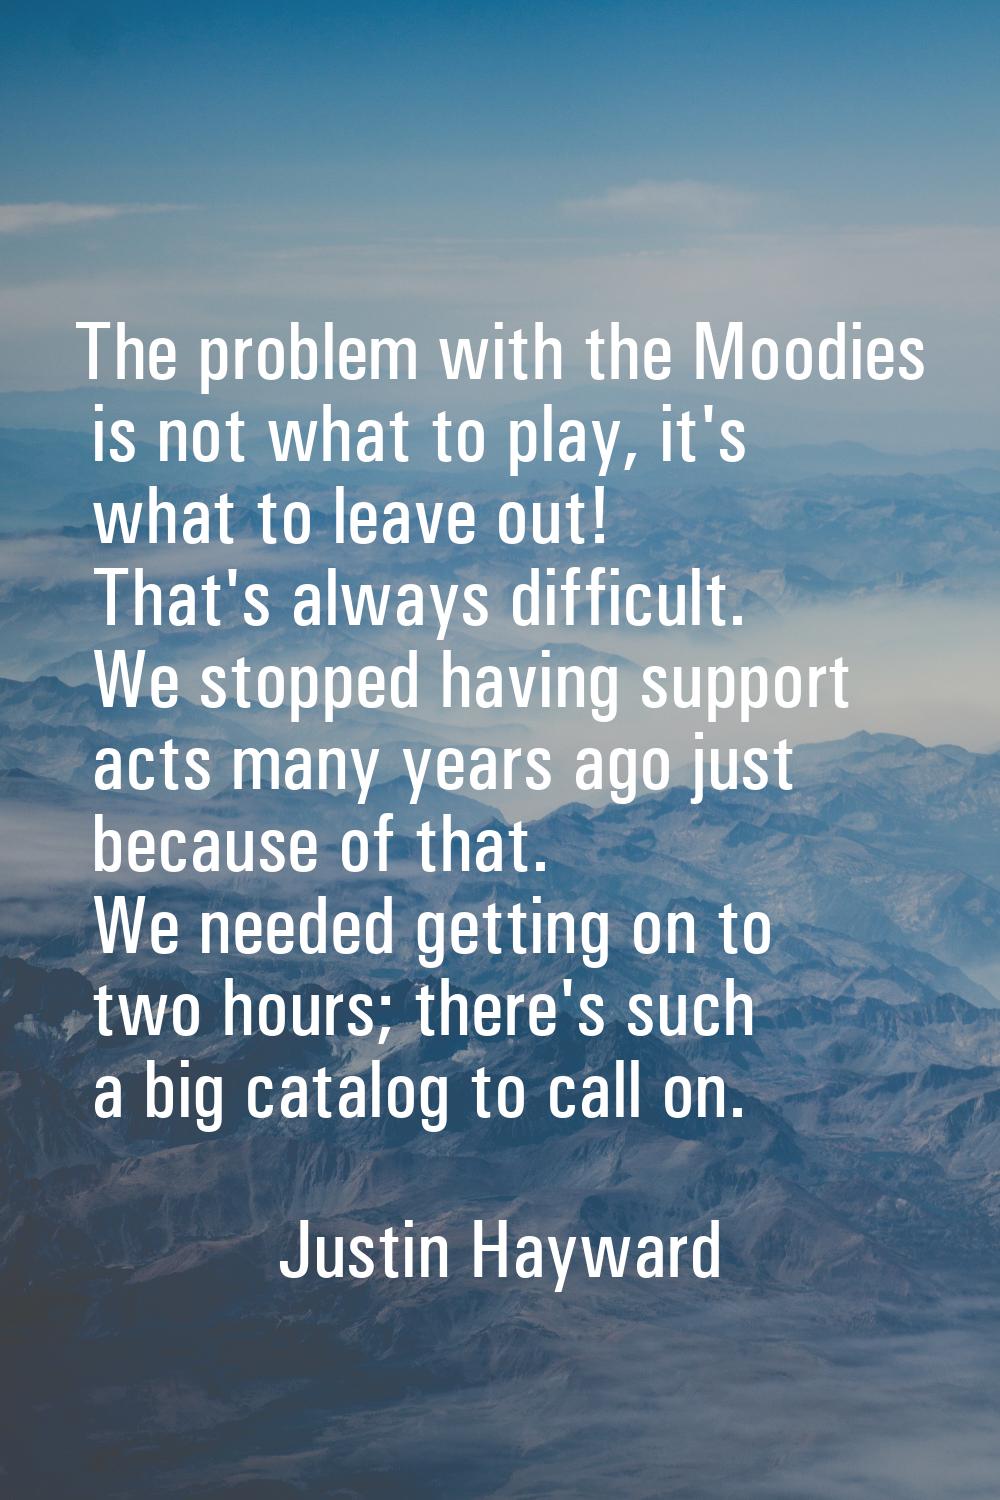 The problem with the Moodies is not what to play, it's what to leave out! That's always difficult. 